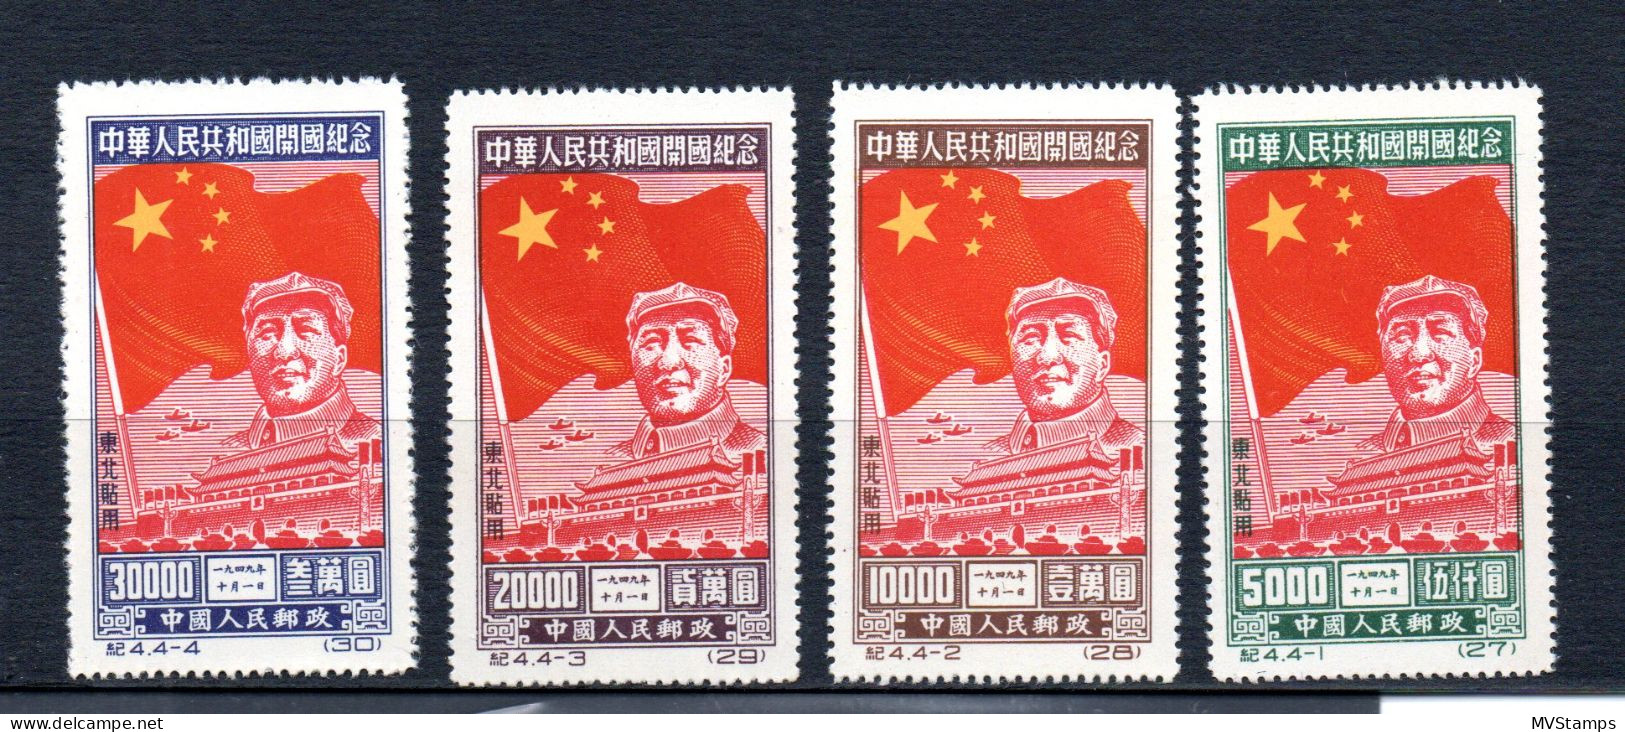 North East China 1950 Sc 150/53 (Michel 172/75) Mao Nice MNH - Chine Du Nord-Est 1946-48